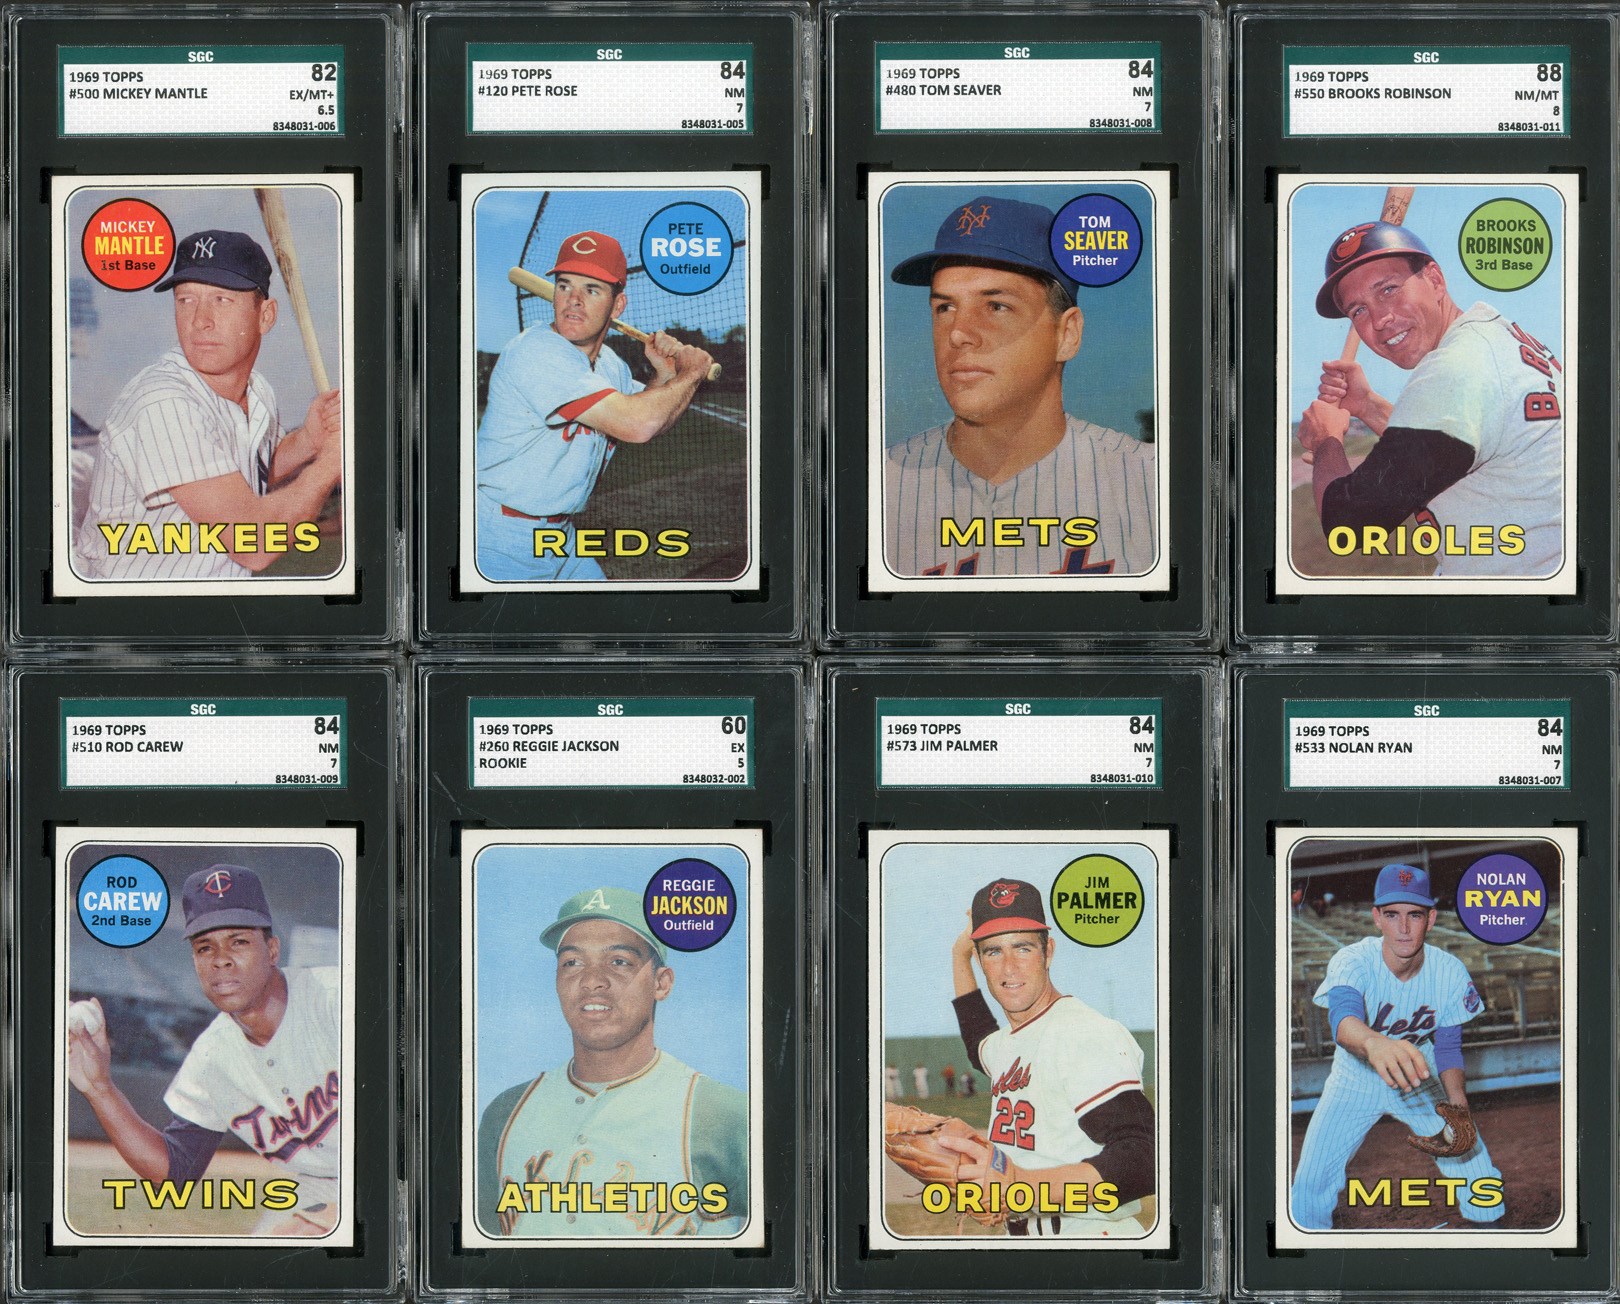 Baseball and Trading Cards - 1969 Topps Complete Set (664 Cards - 8 SGC Graded)